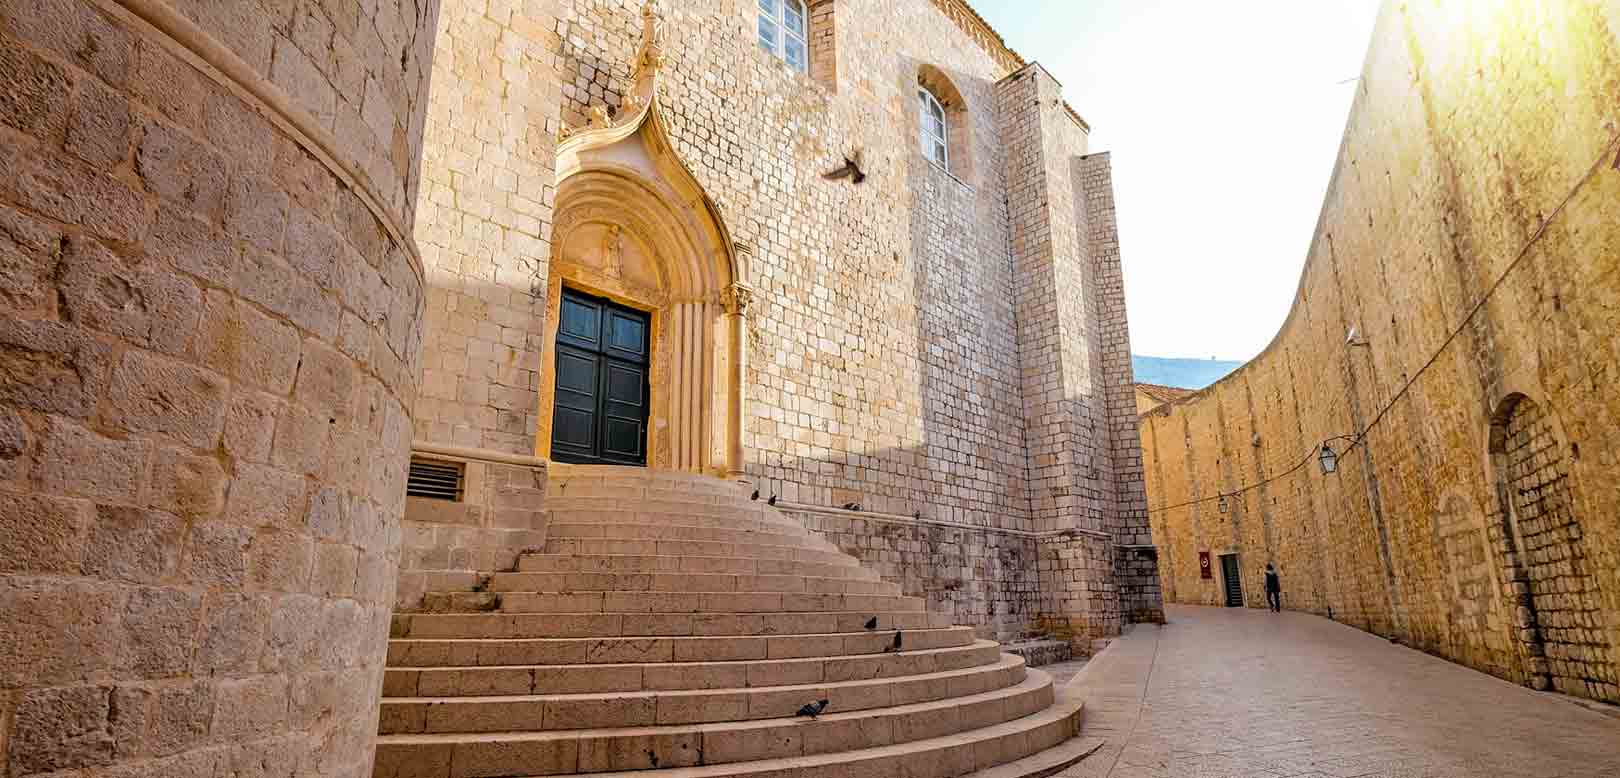 Things to Do in Dubrovnik : Game of Thrones Tour